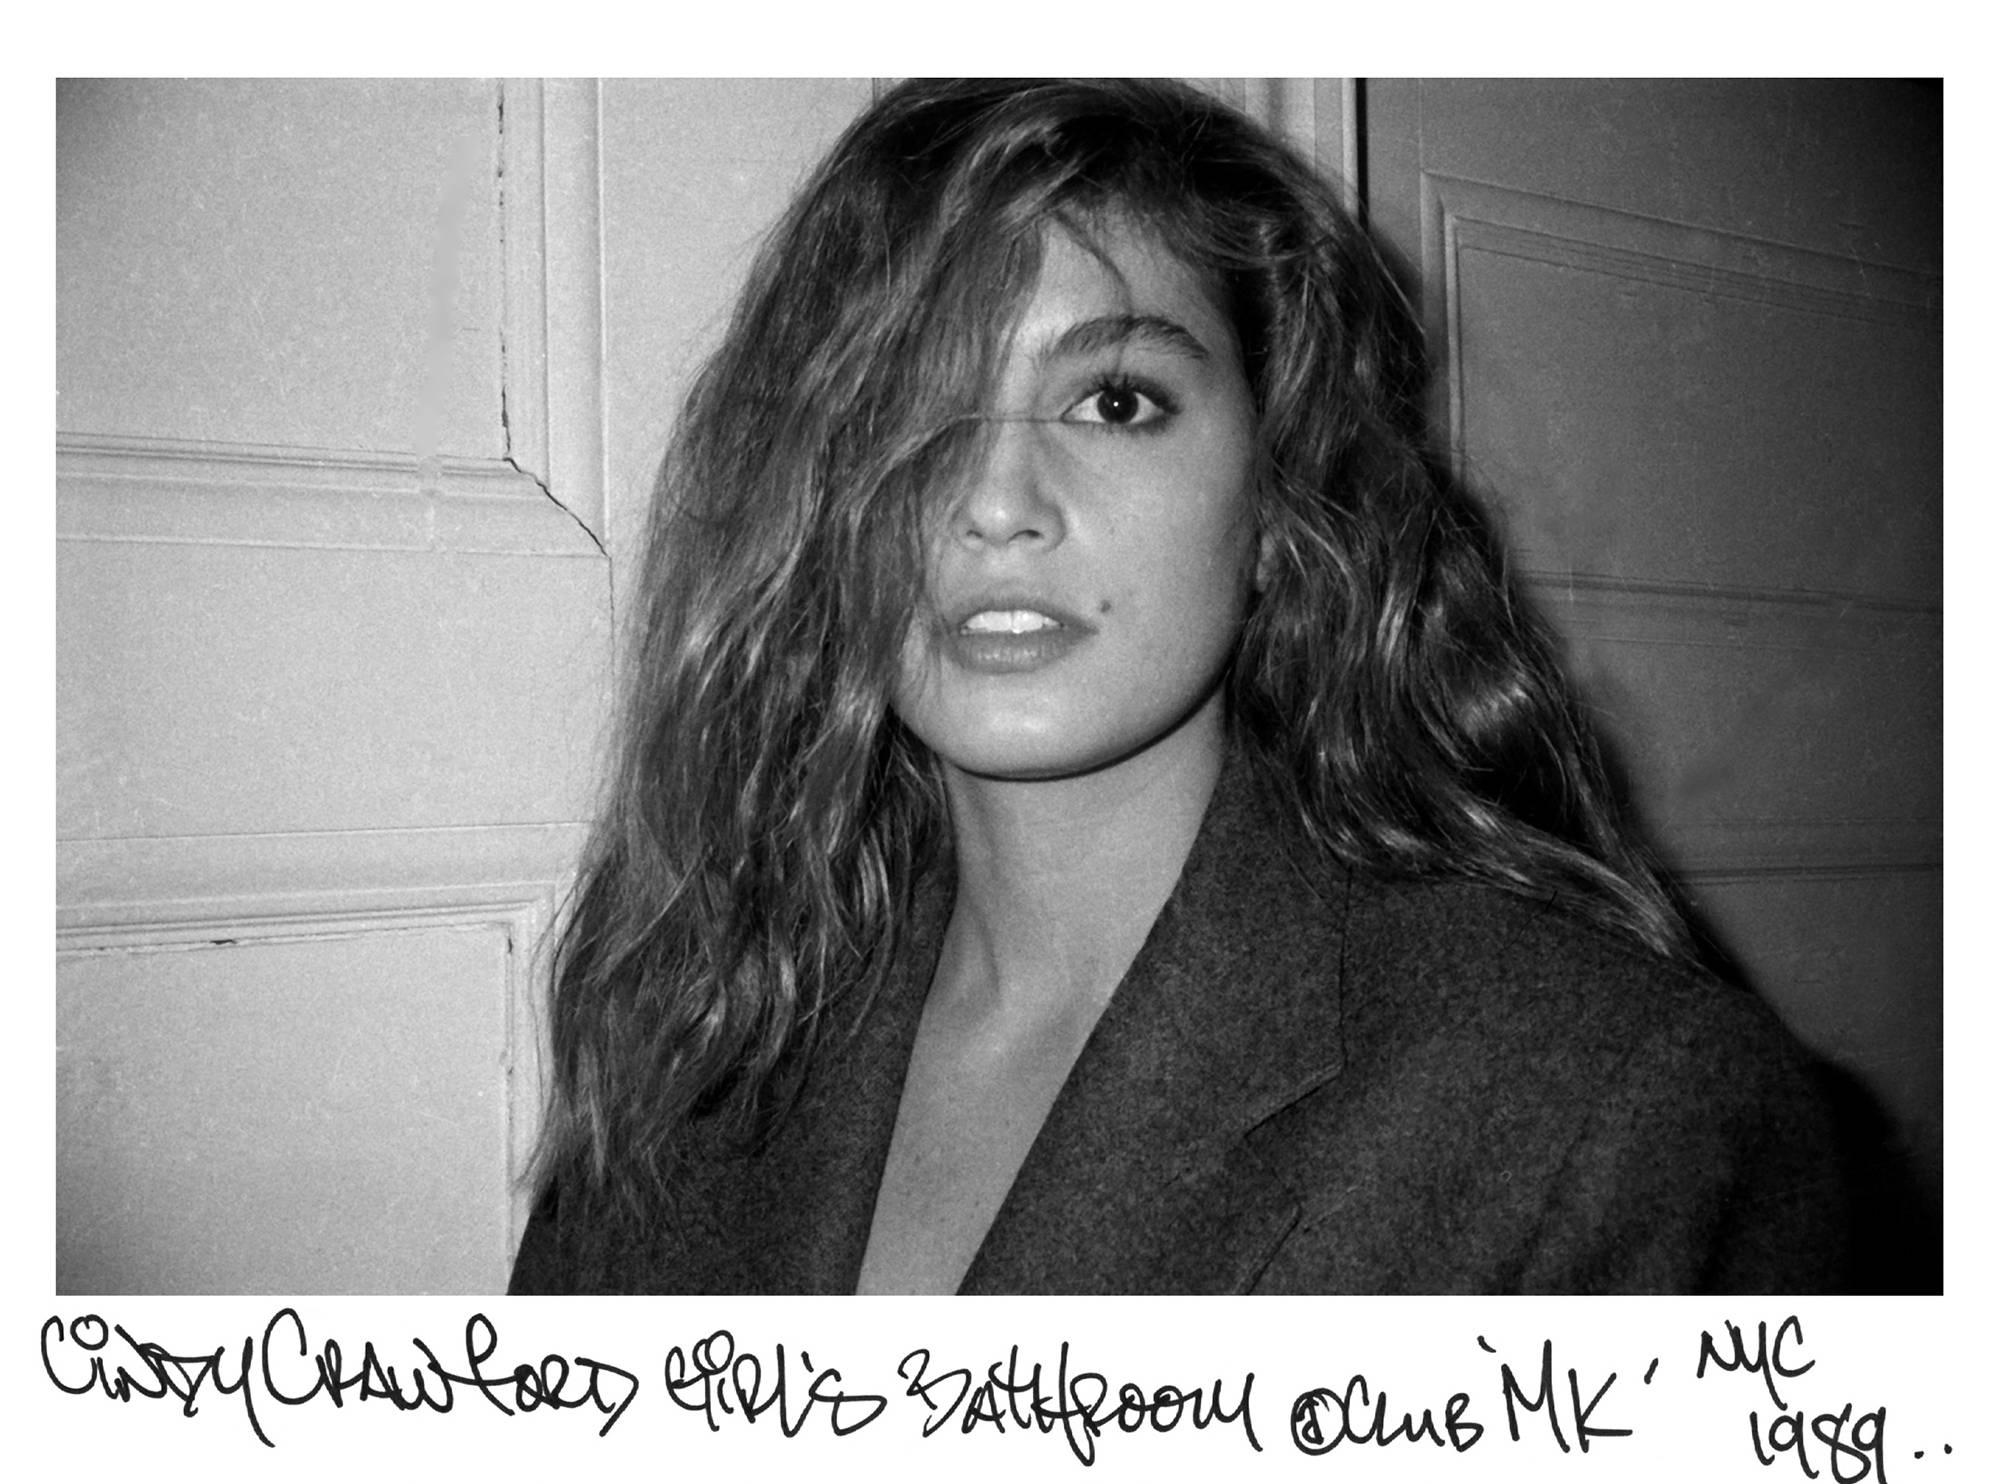 Ricky Powell Black and White Photograph - Cindy Crawford Club MK